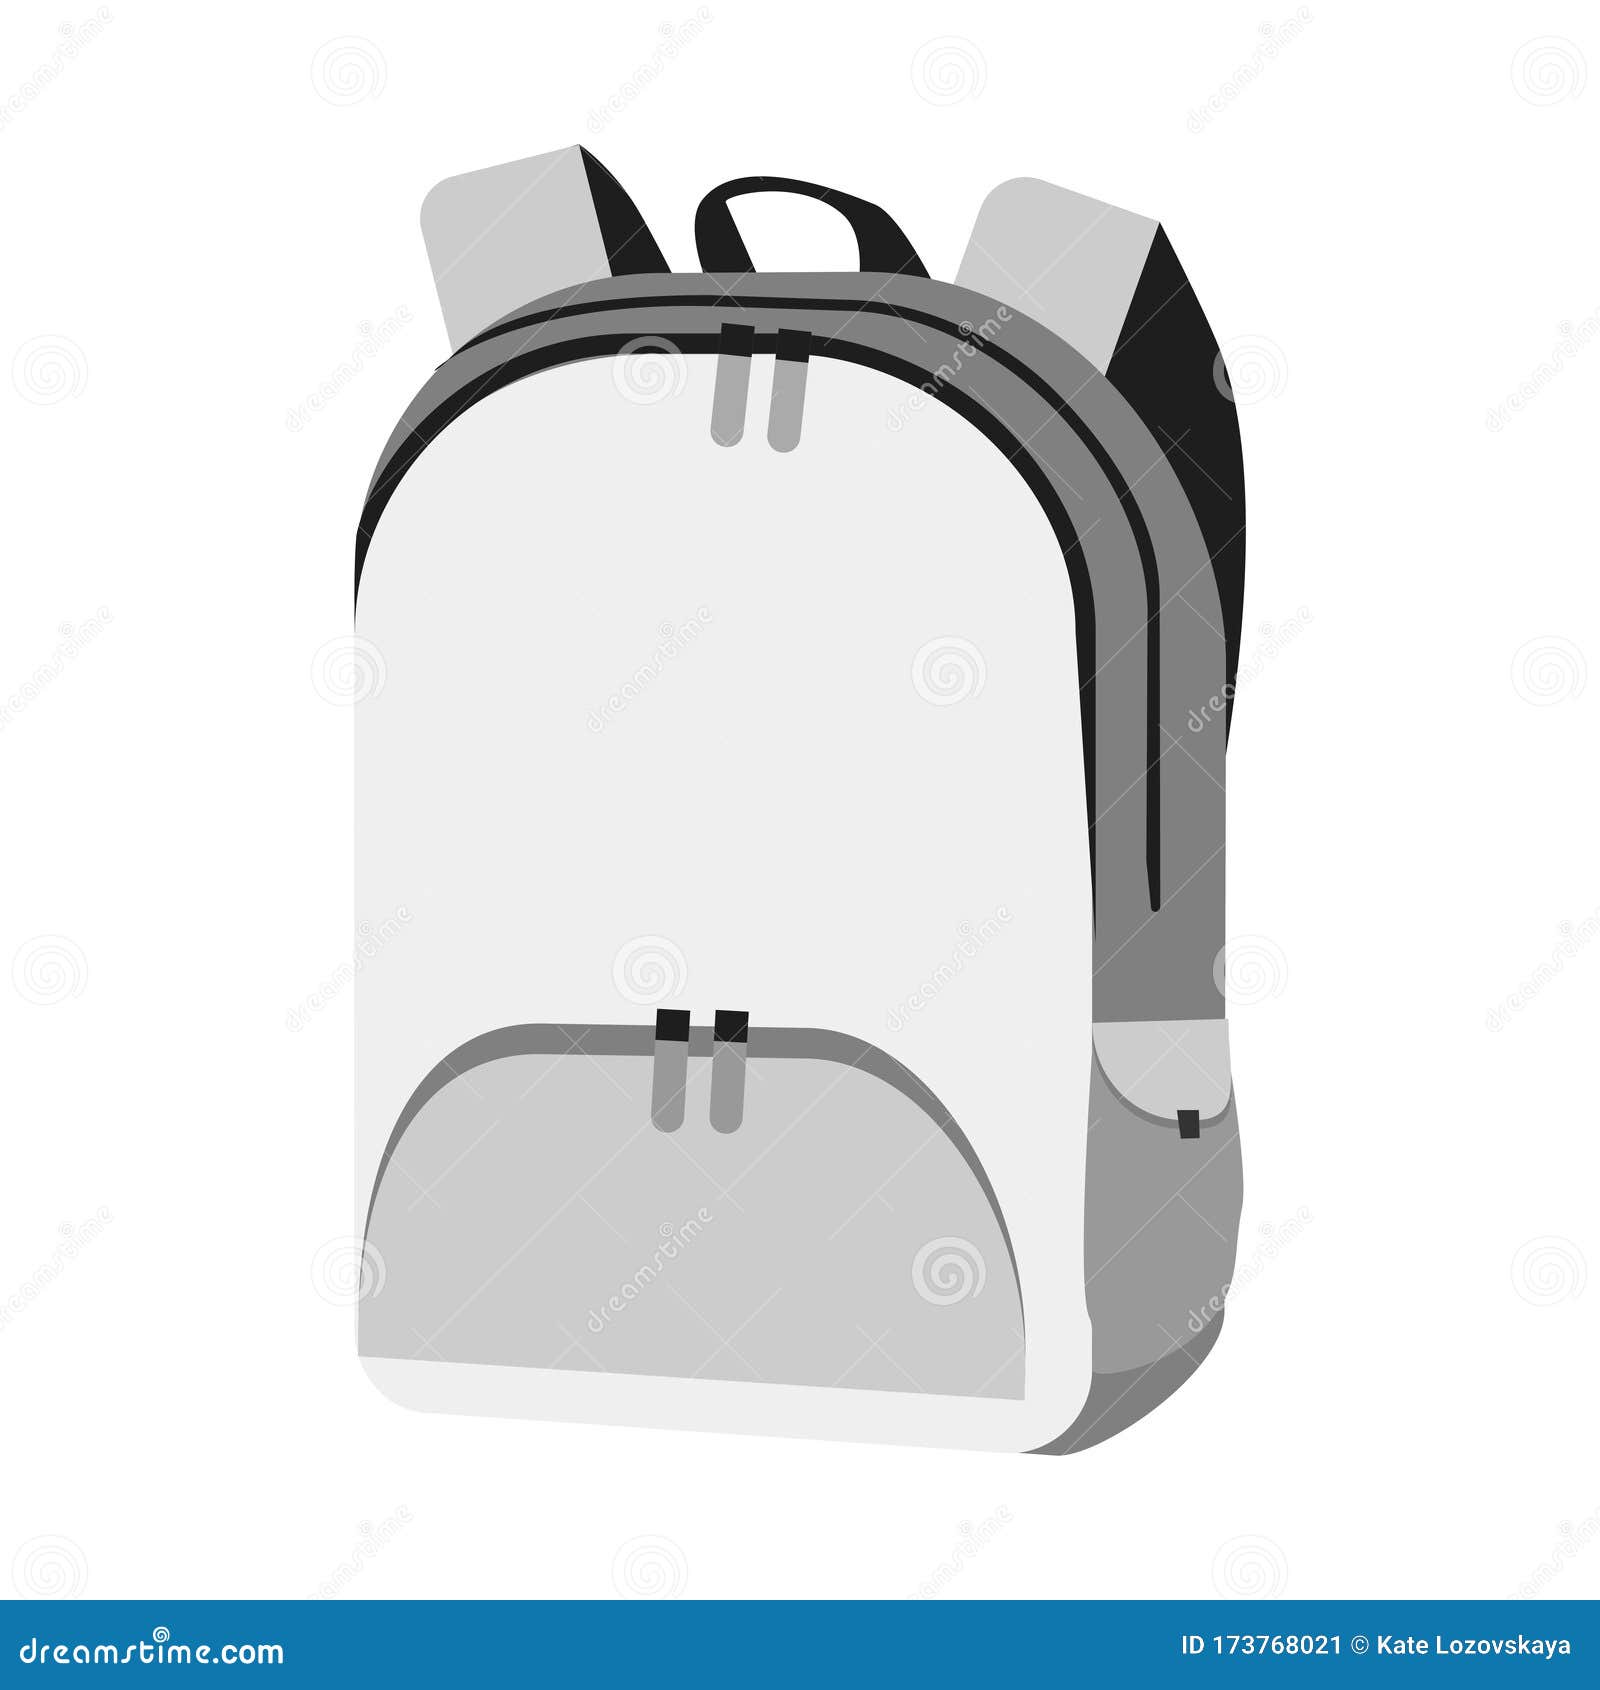 Deskit by Prosoc is a Backpack with Detachable Study Table